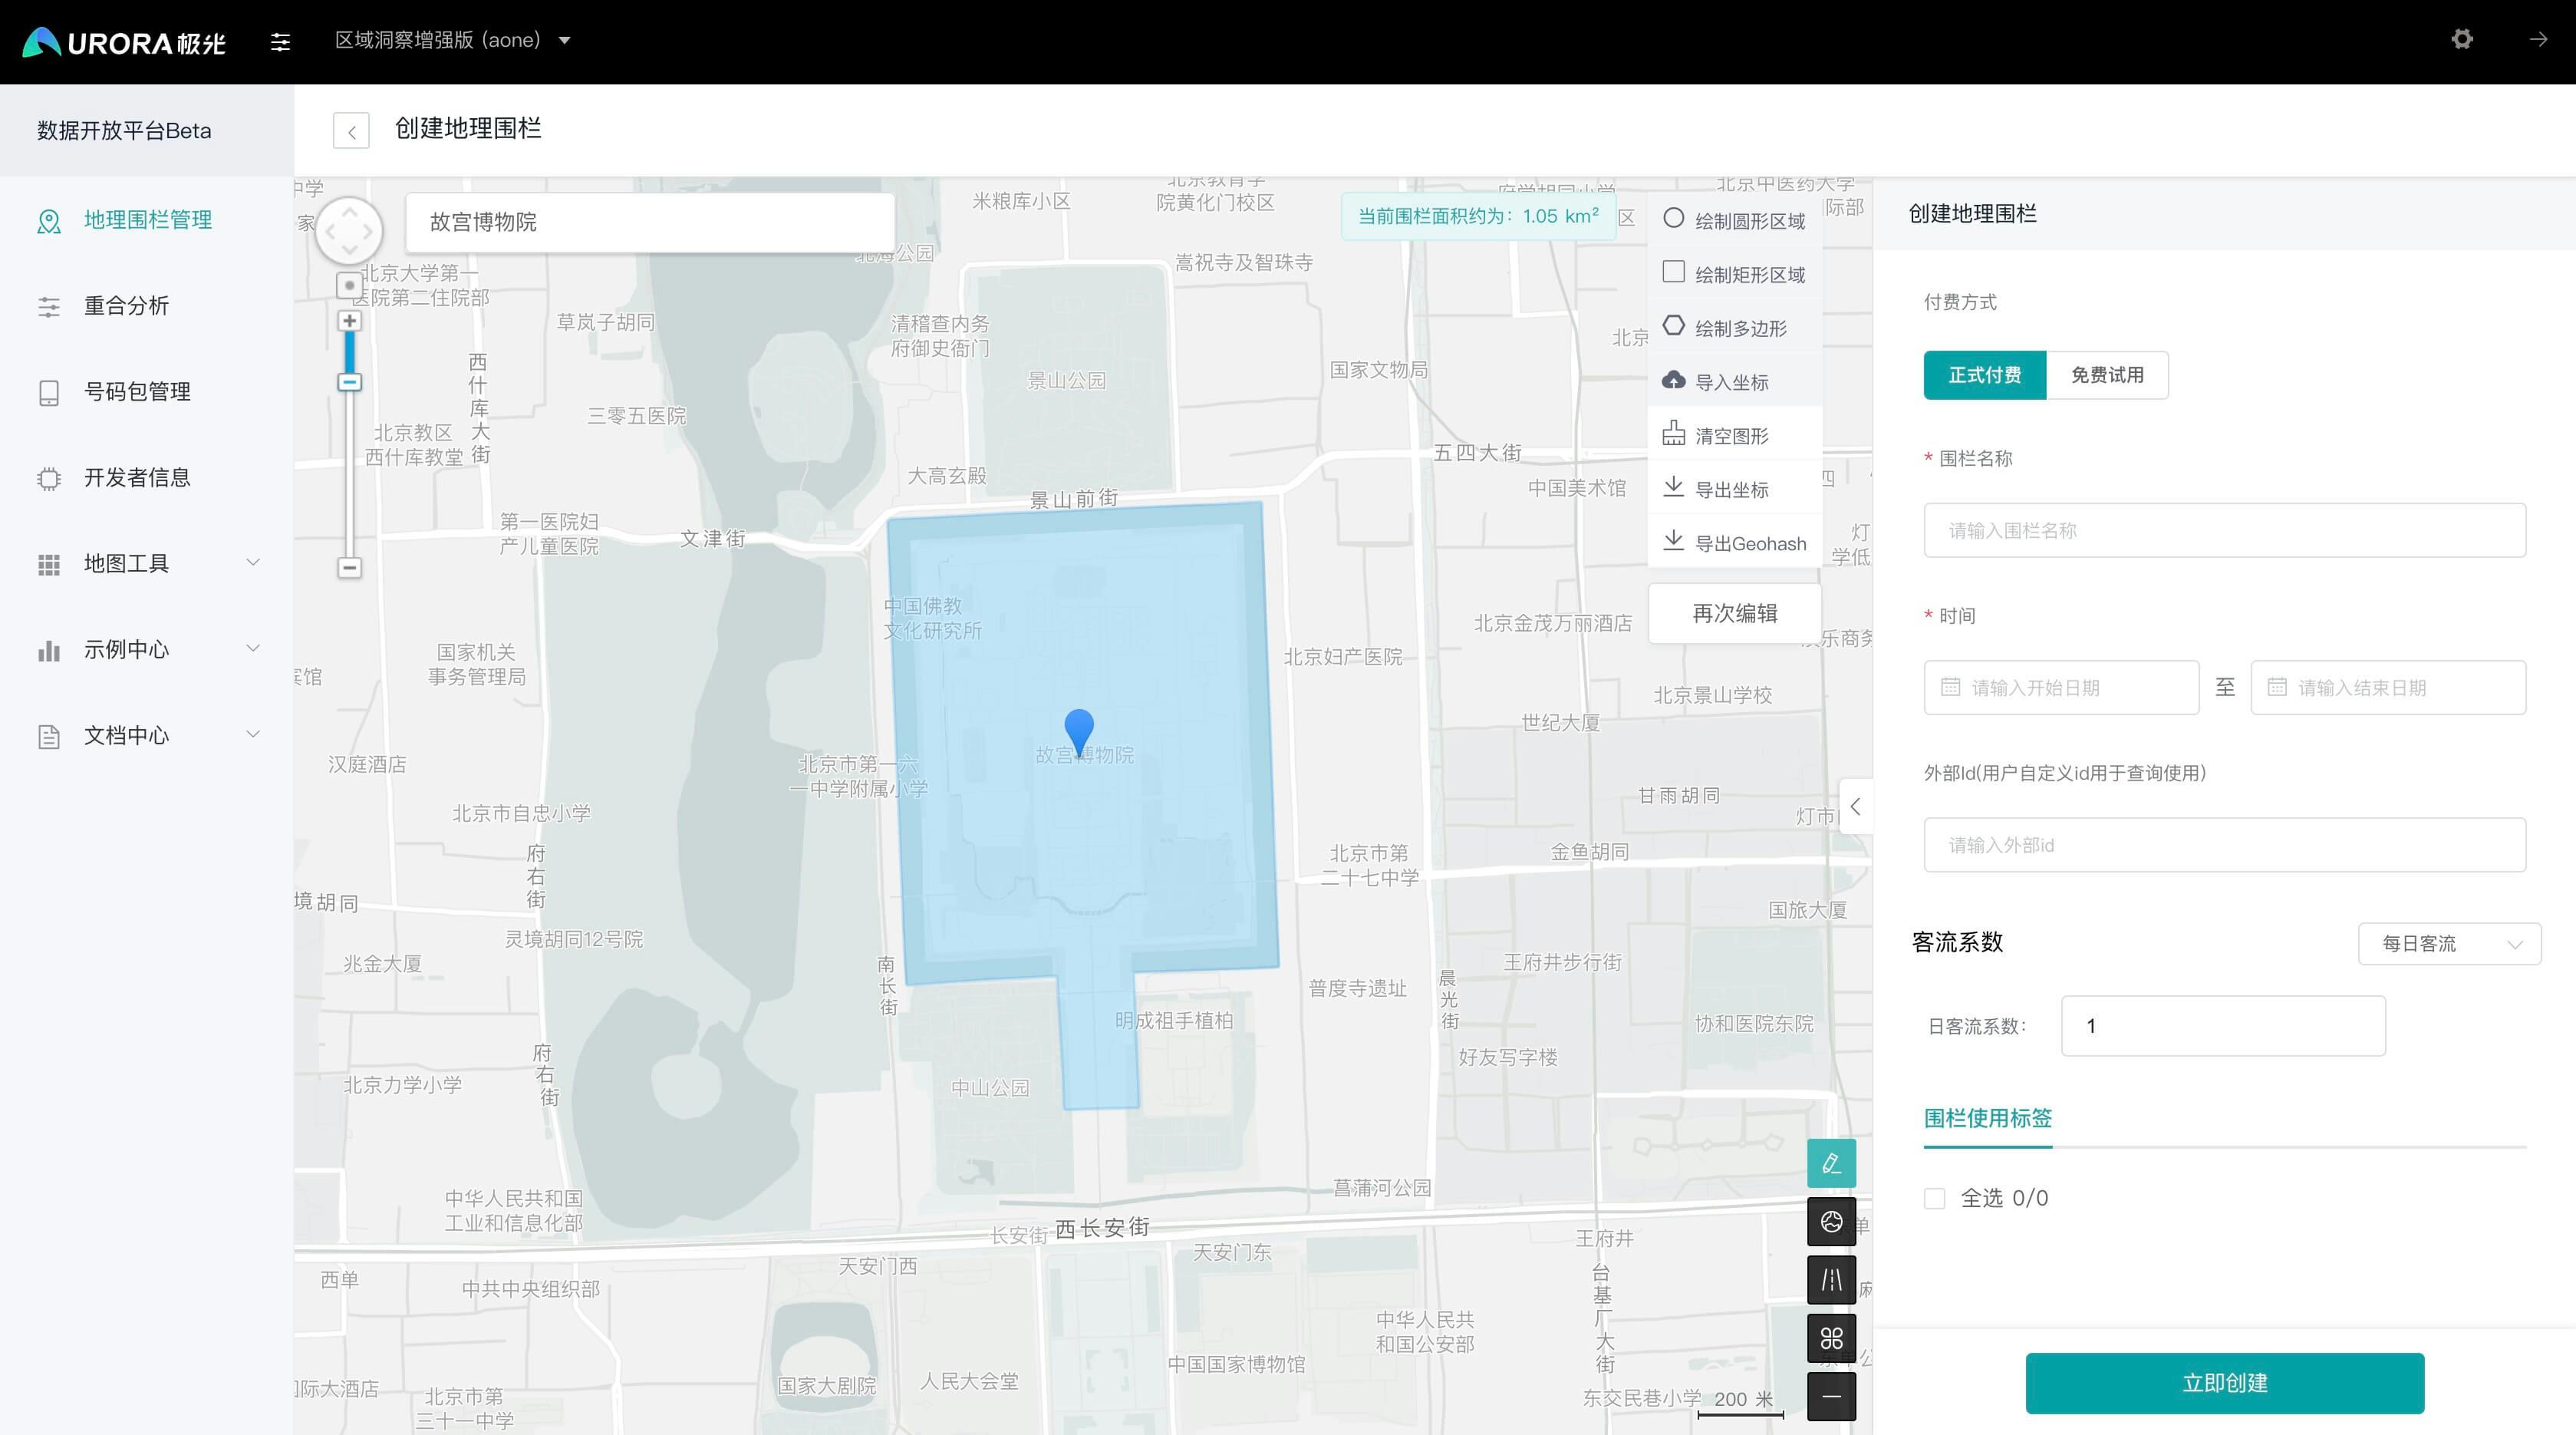 Aone - Open Platform for Geographic Business Data